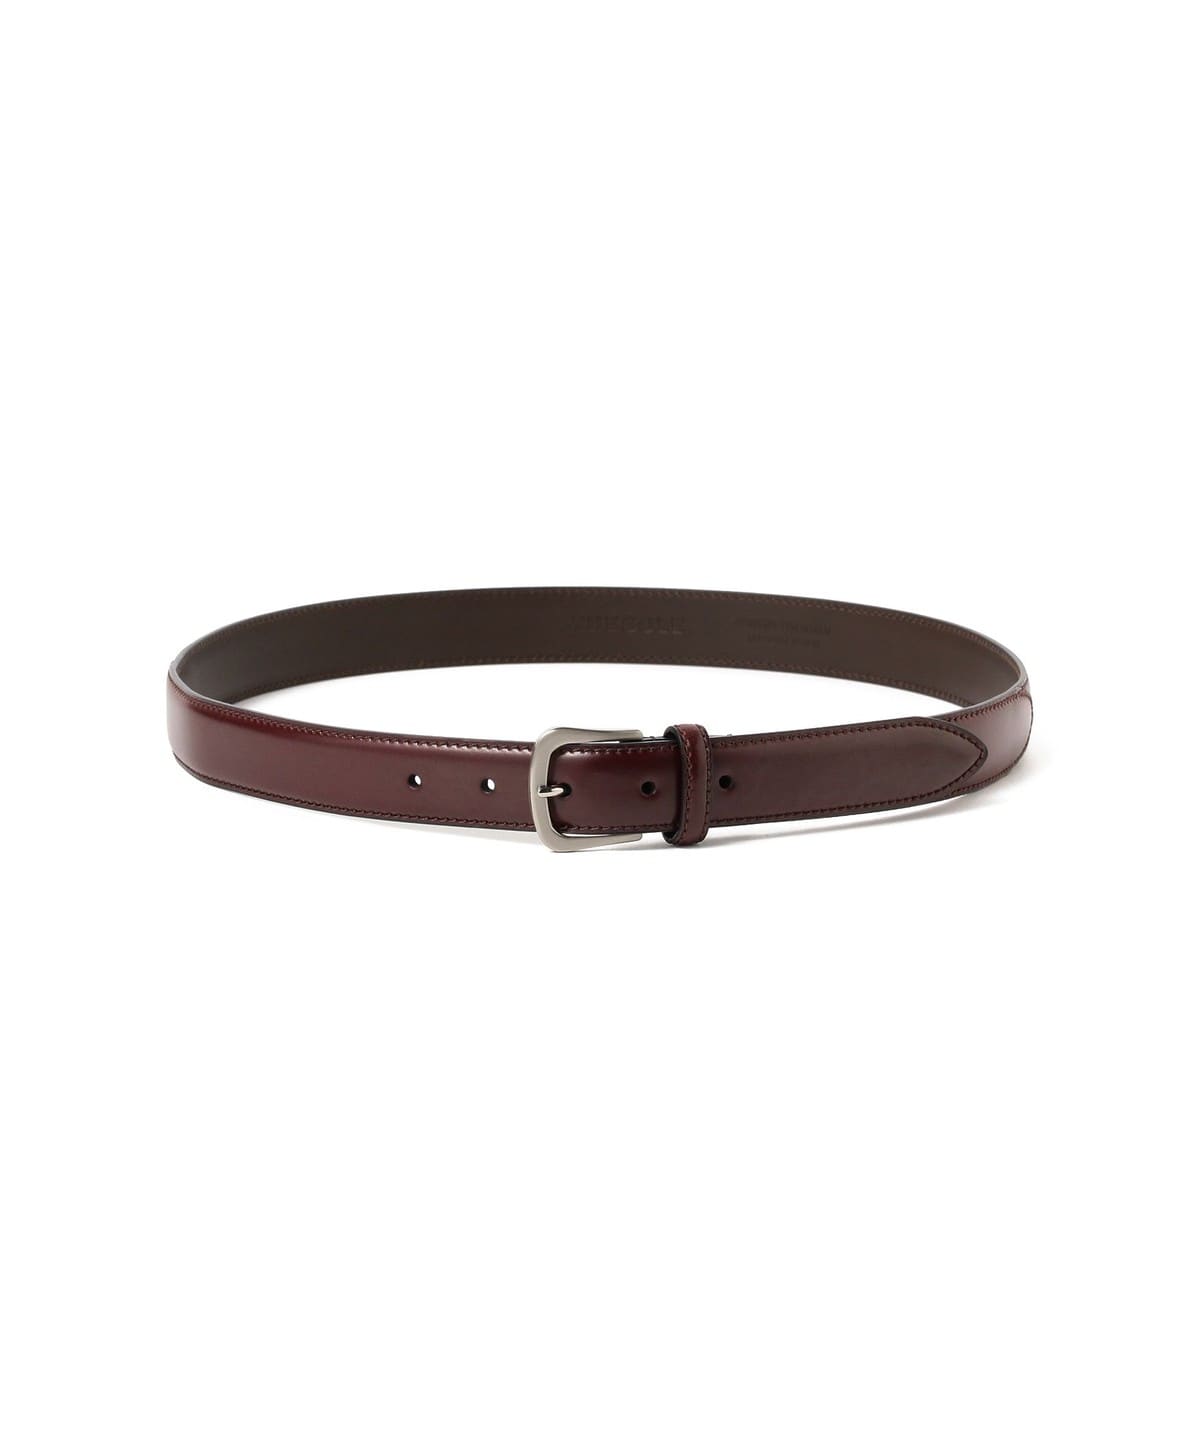 BEAMS F THE SOLE / Cordovan leather belt (fashion miscellaneous 